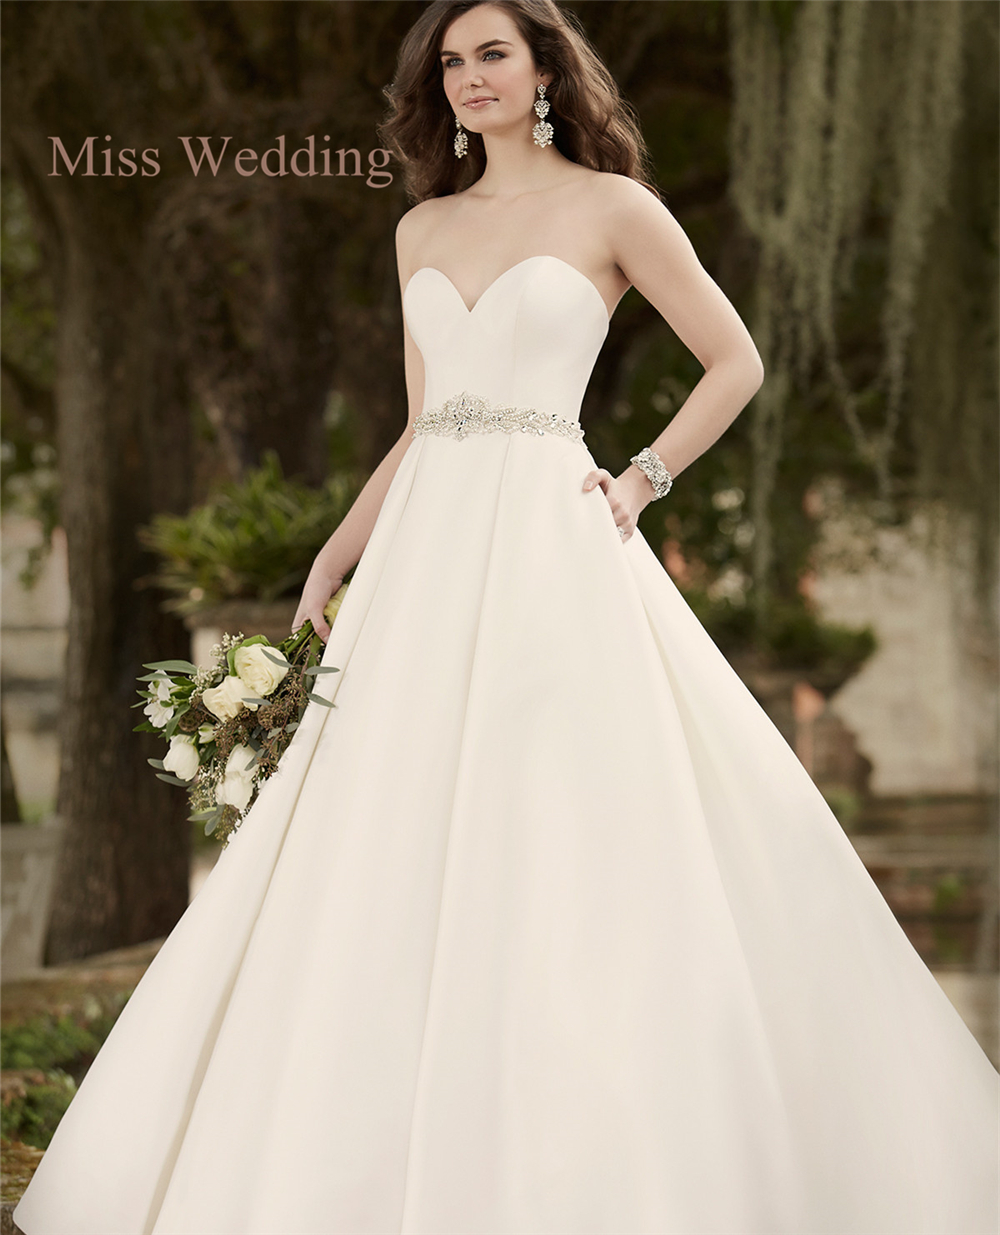  Miss Wedding Dresses  The ultimate guide 